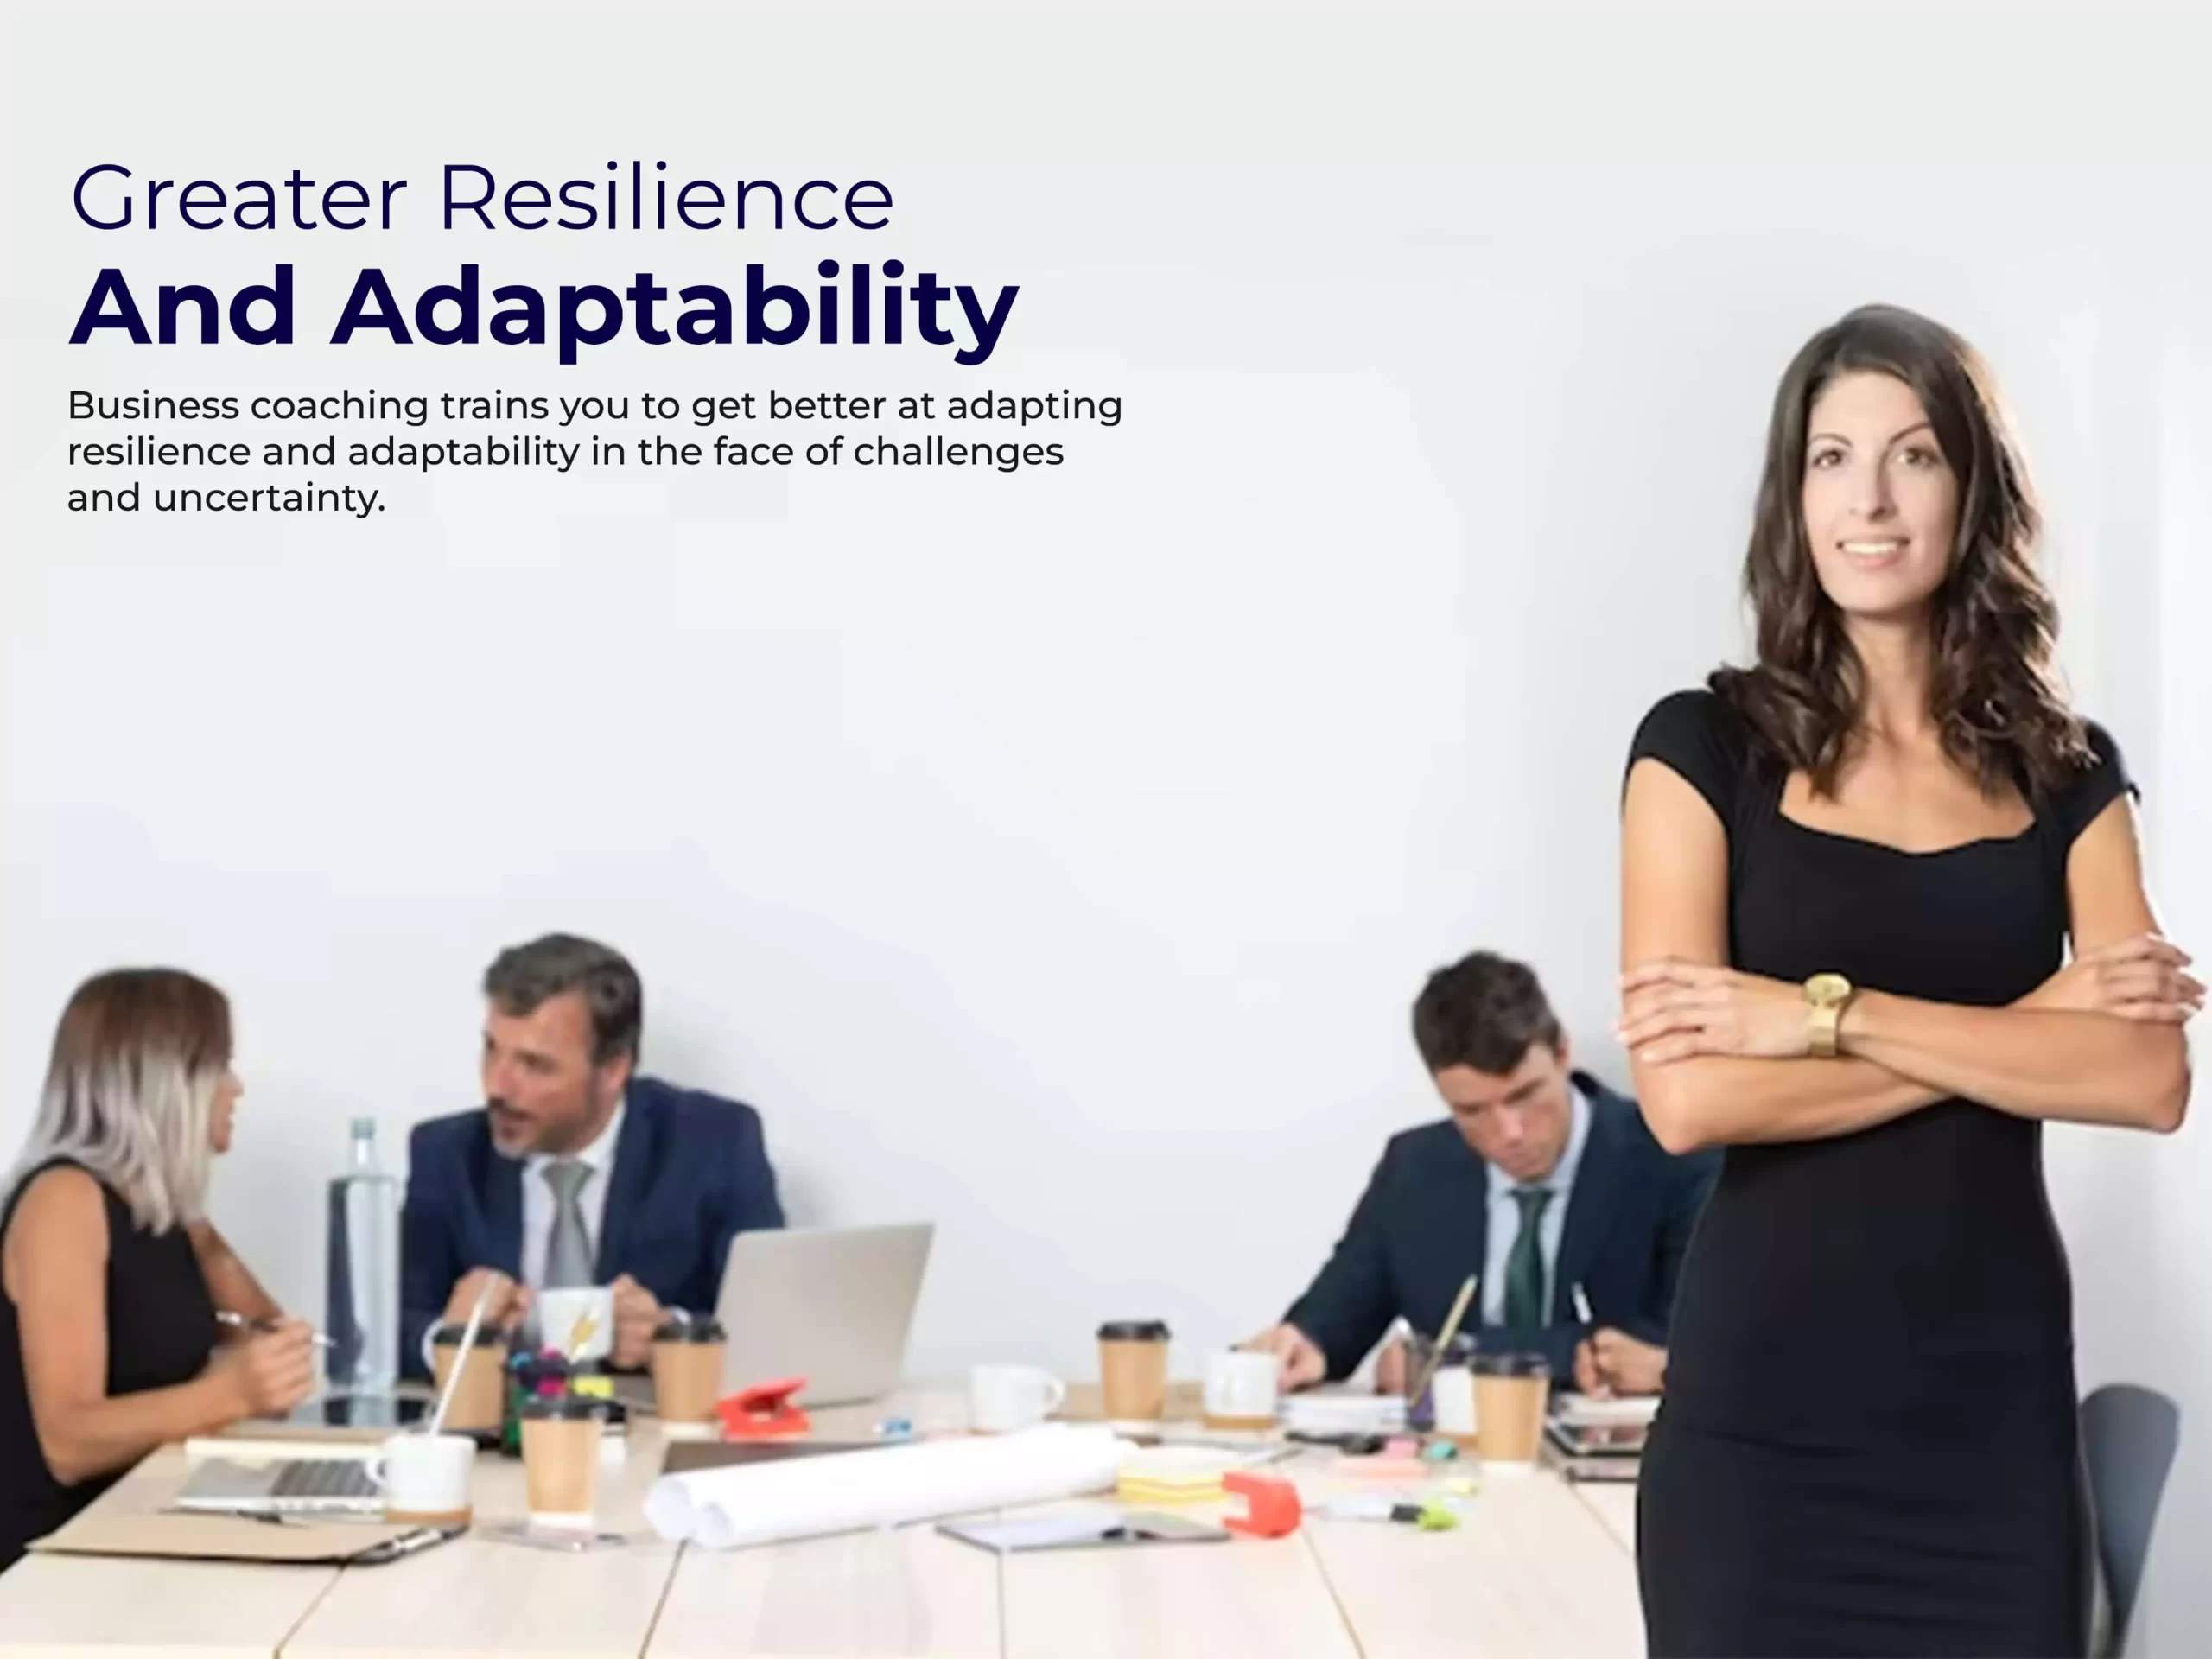 Greater resilience and adaptability